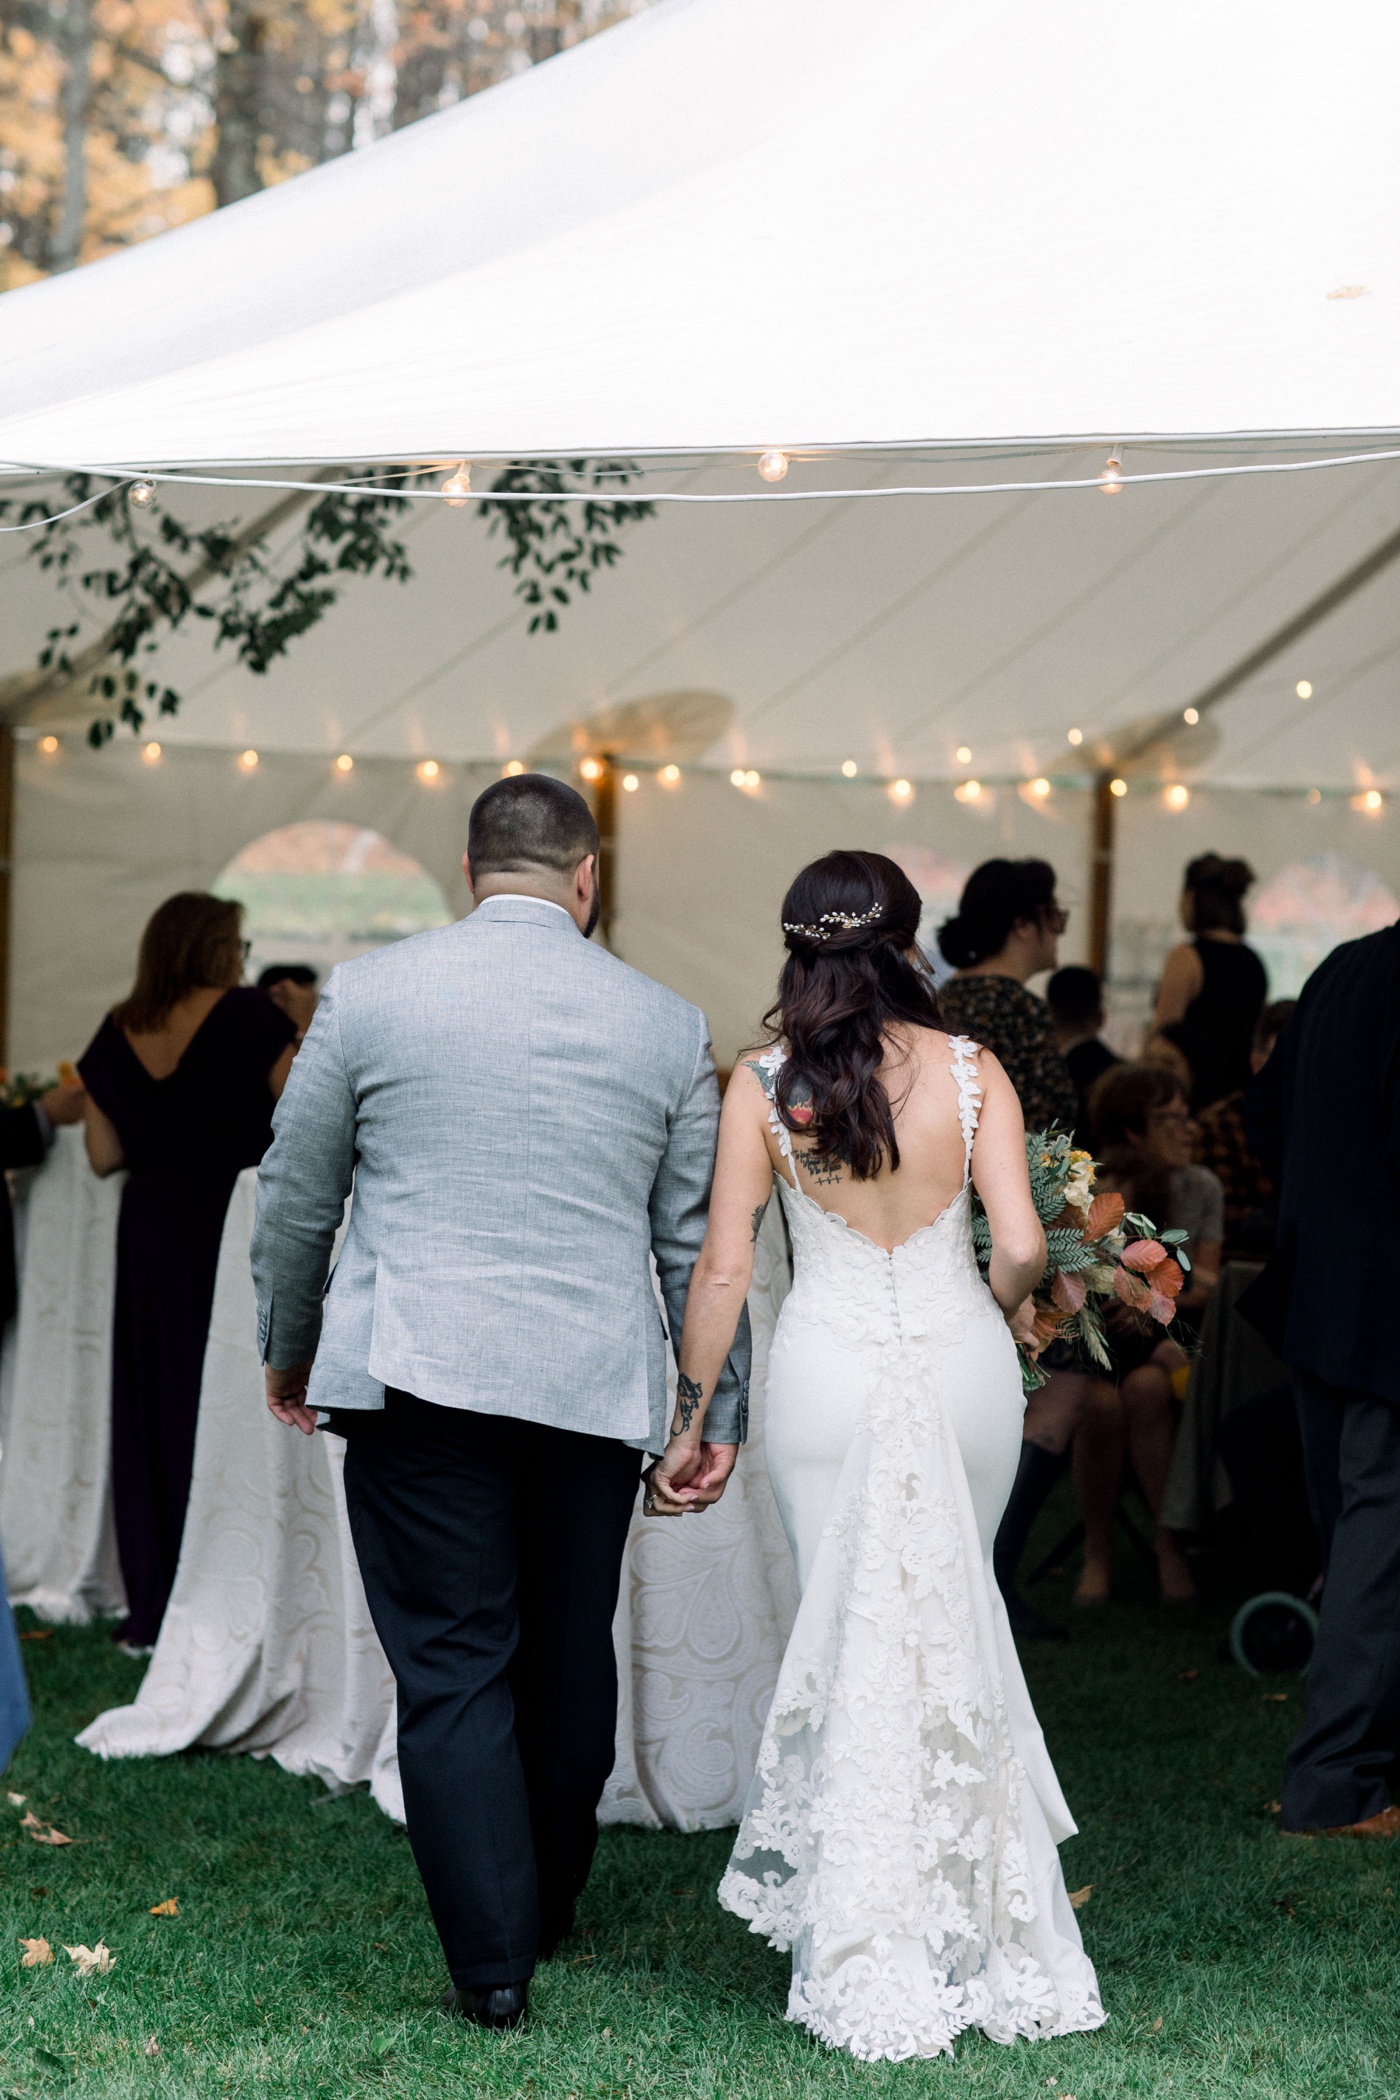 Tented wedding reception at Horse and Hound